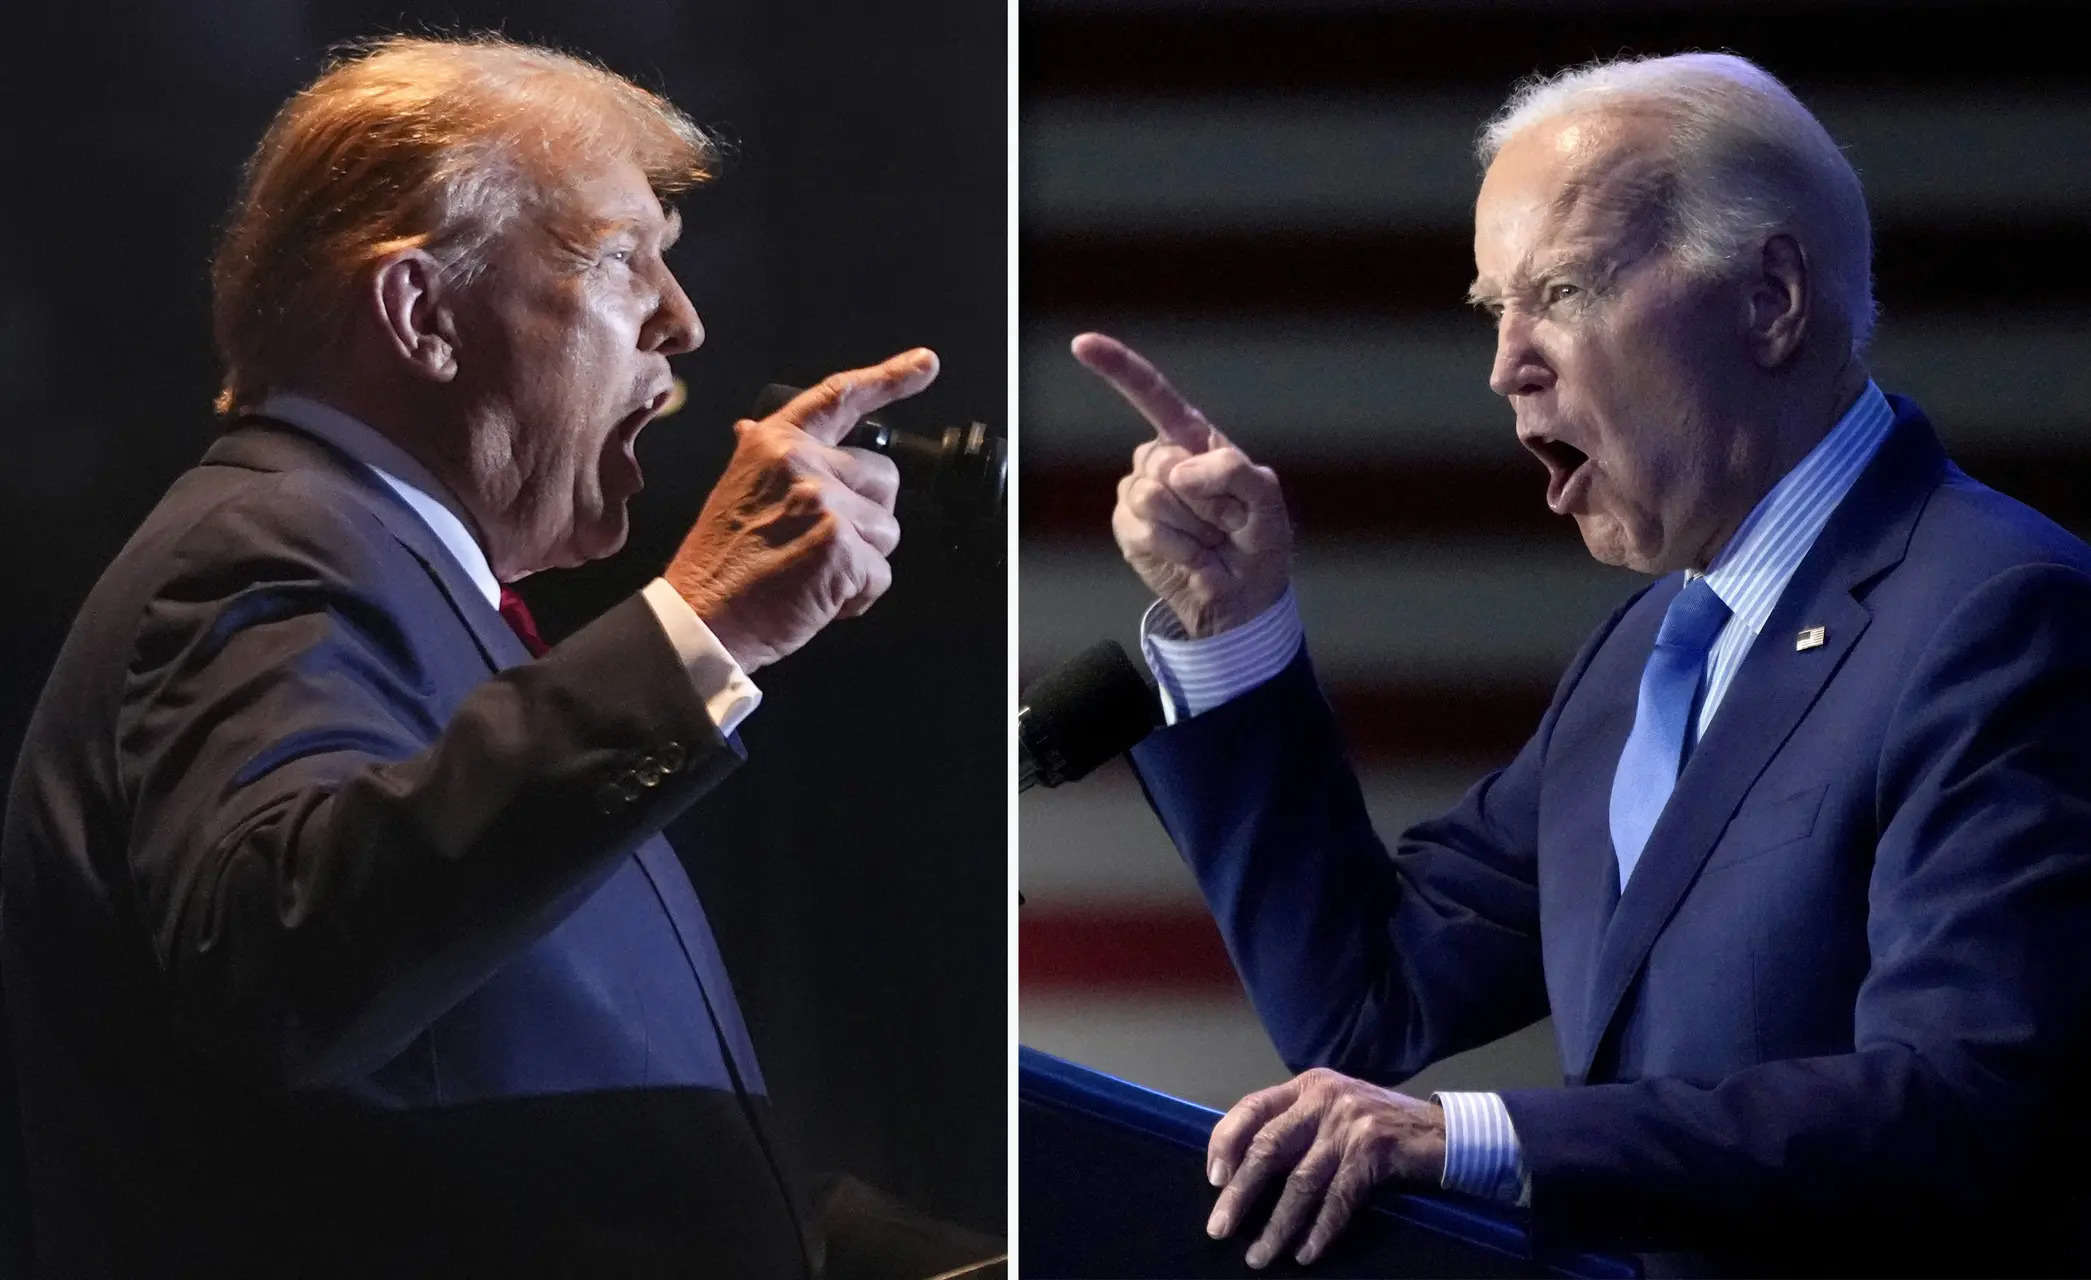 One crazy week: Biden debate fallout upends White House race 